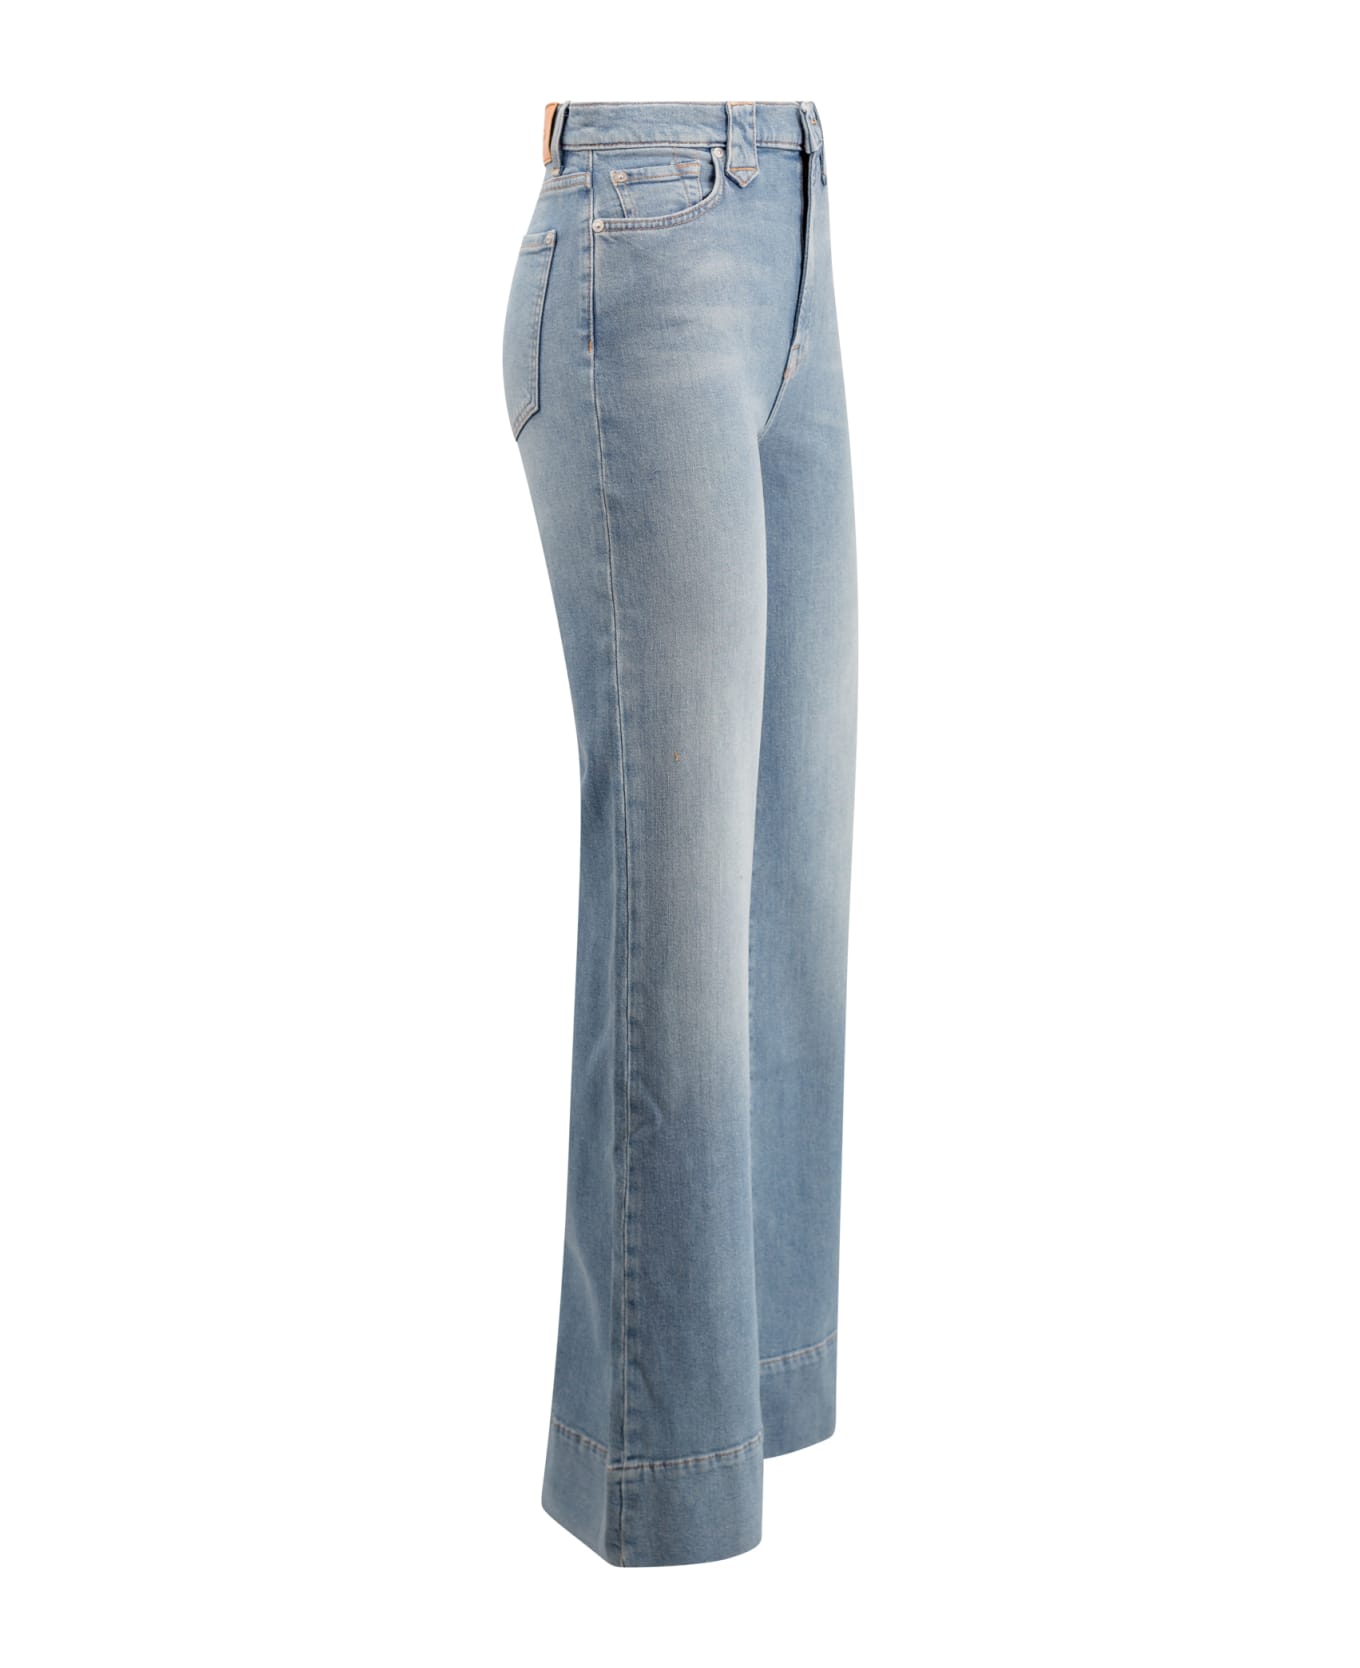 7 For All Mankind High-waisted Flared Jeans - Denim